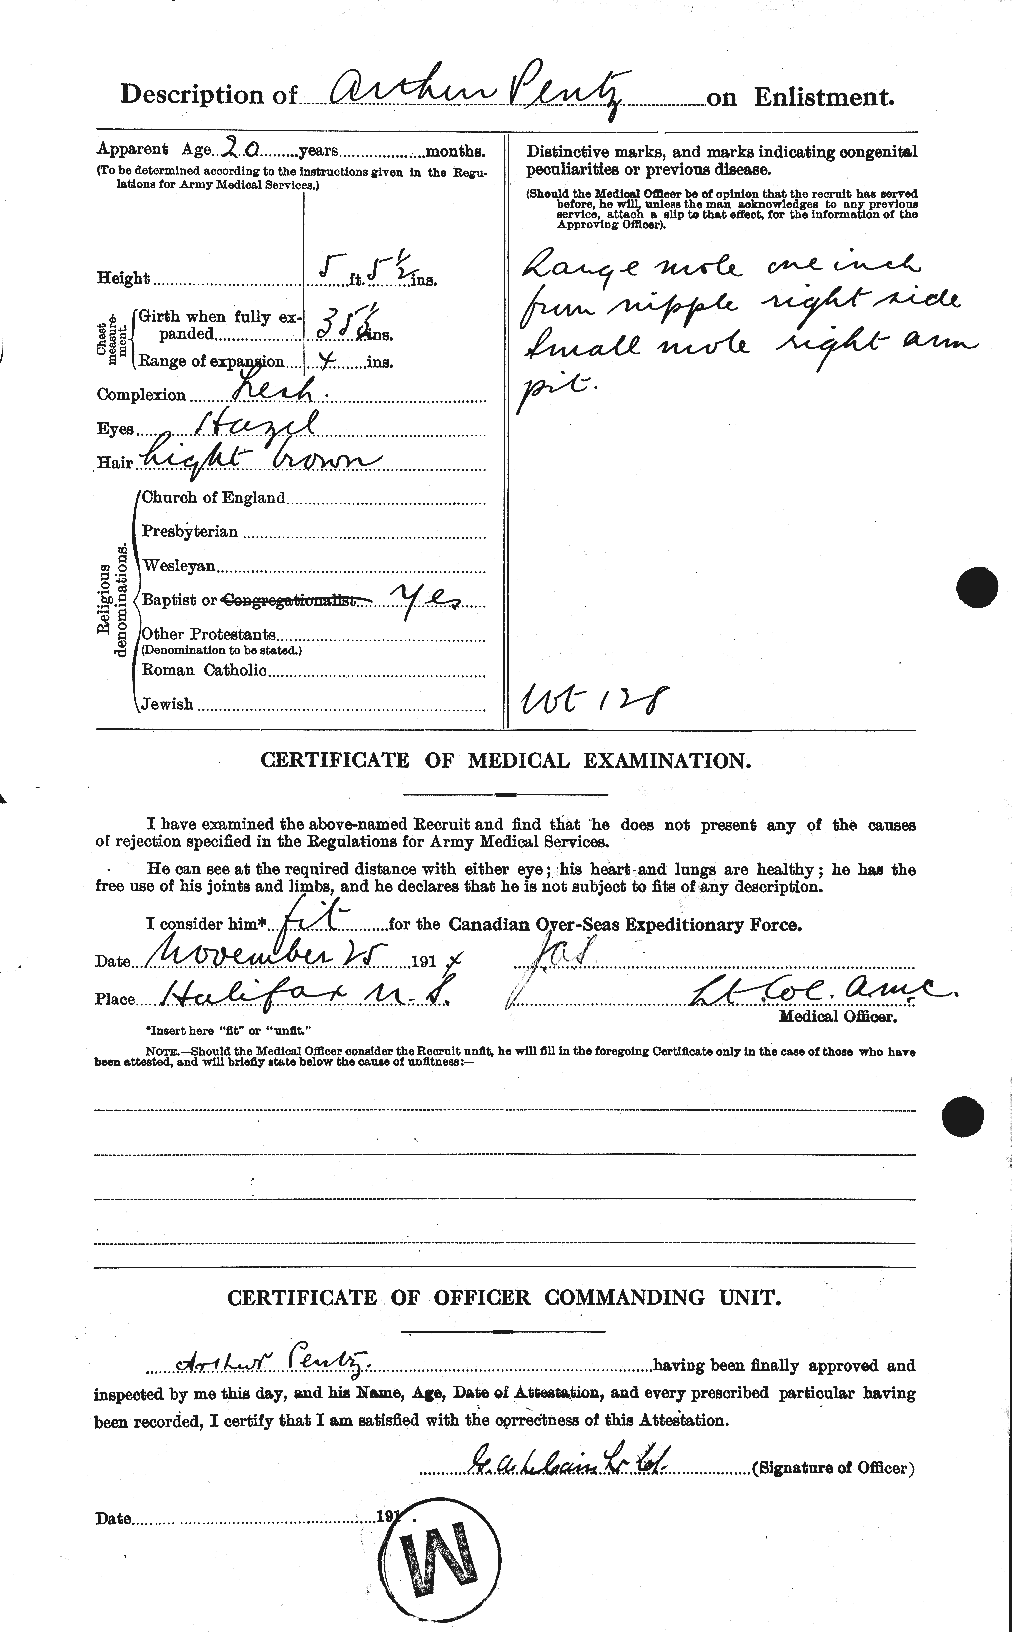 Personnel Records of the First World War - CEF 573488b